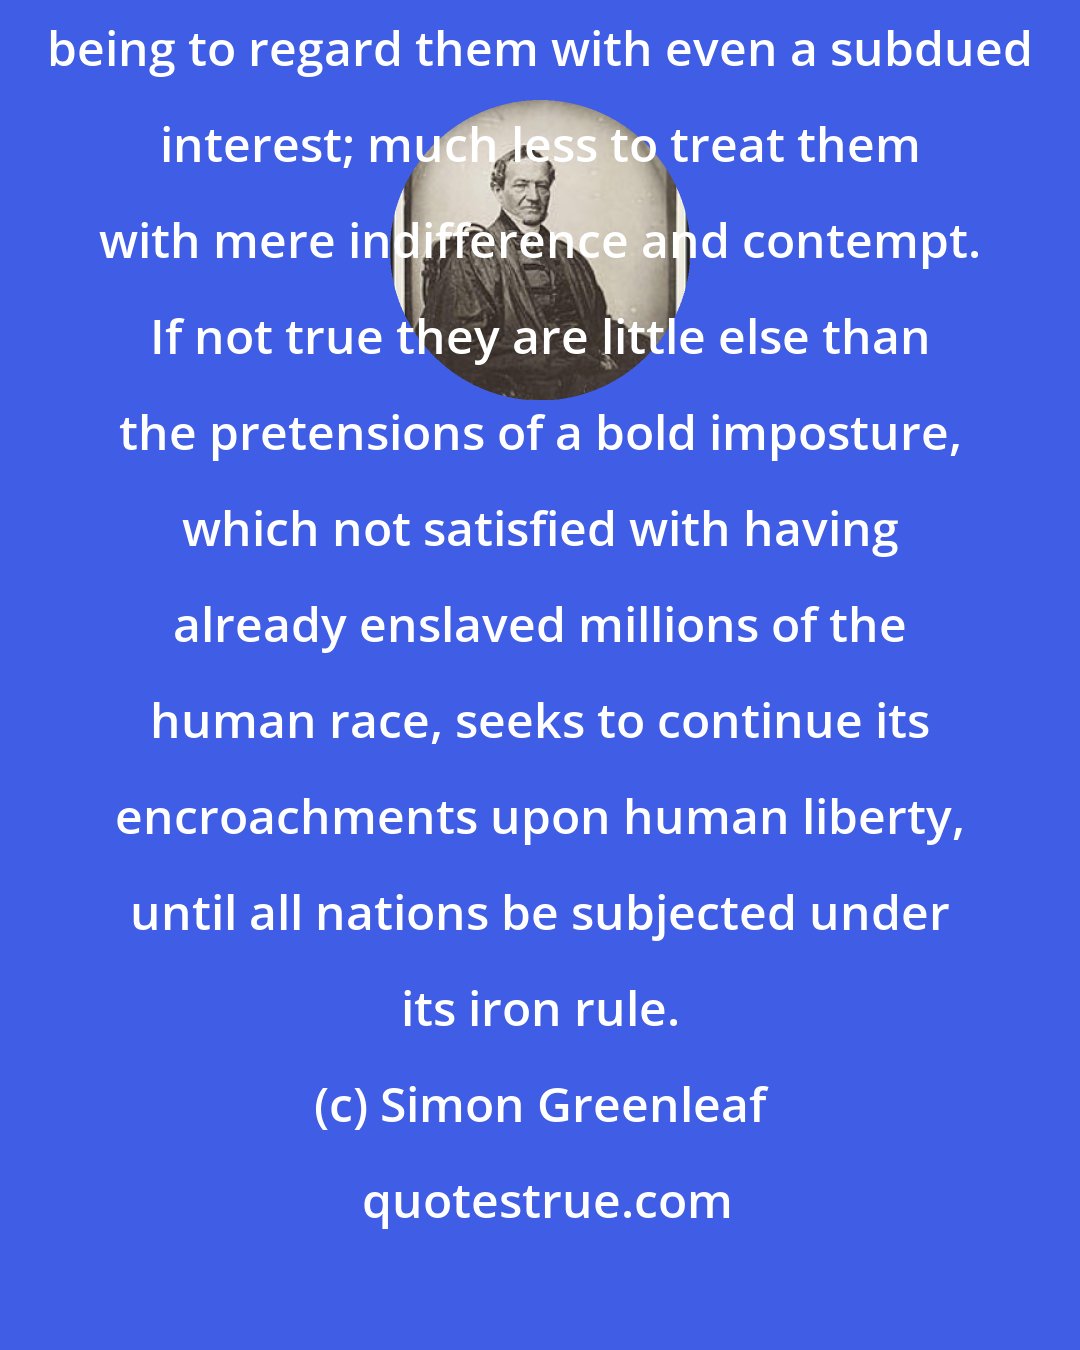 Simon Greenleaf: These are no ordinary claims; and it seems hardly possible for a rational being to regard them with even a subdued interest; much less to treat them with mere indifference and contempt. If not true they are little else than the pretensions of a bold imposture, which not satisfied with having already enslaved millions of the human race, seeks to continue its encroachments upon human liberty, until all nations be subjected under its iron rule.